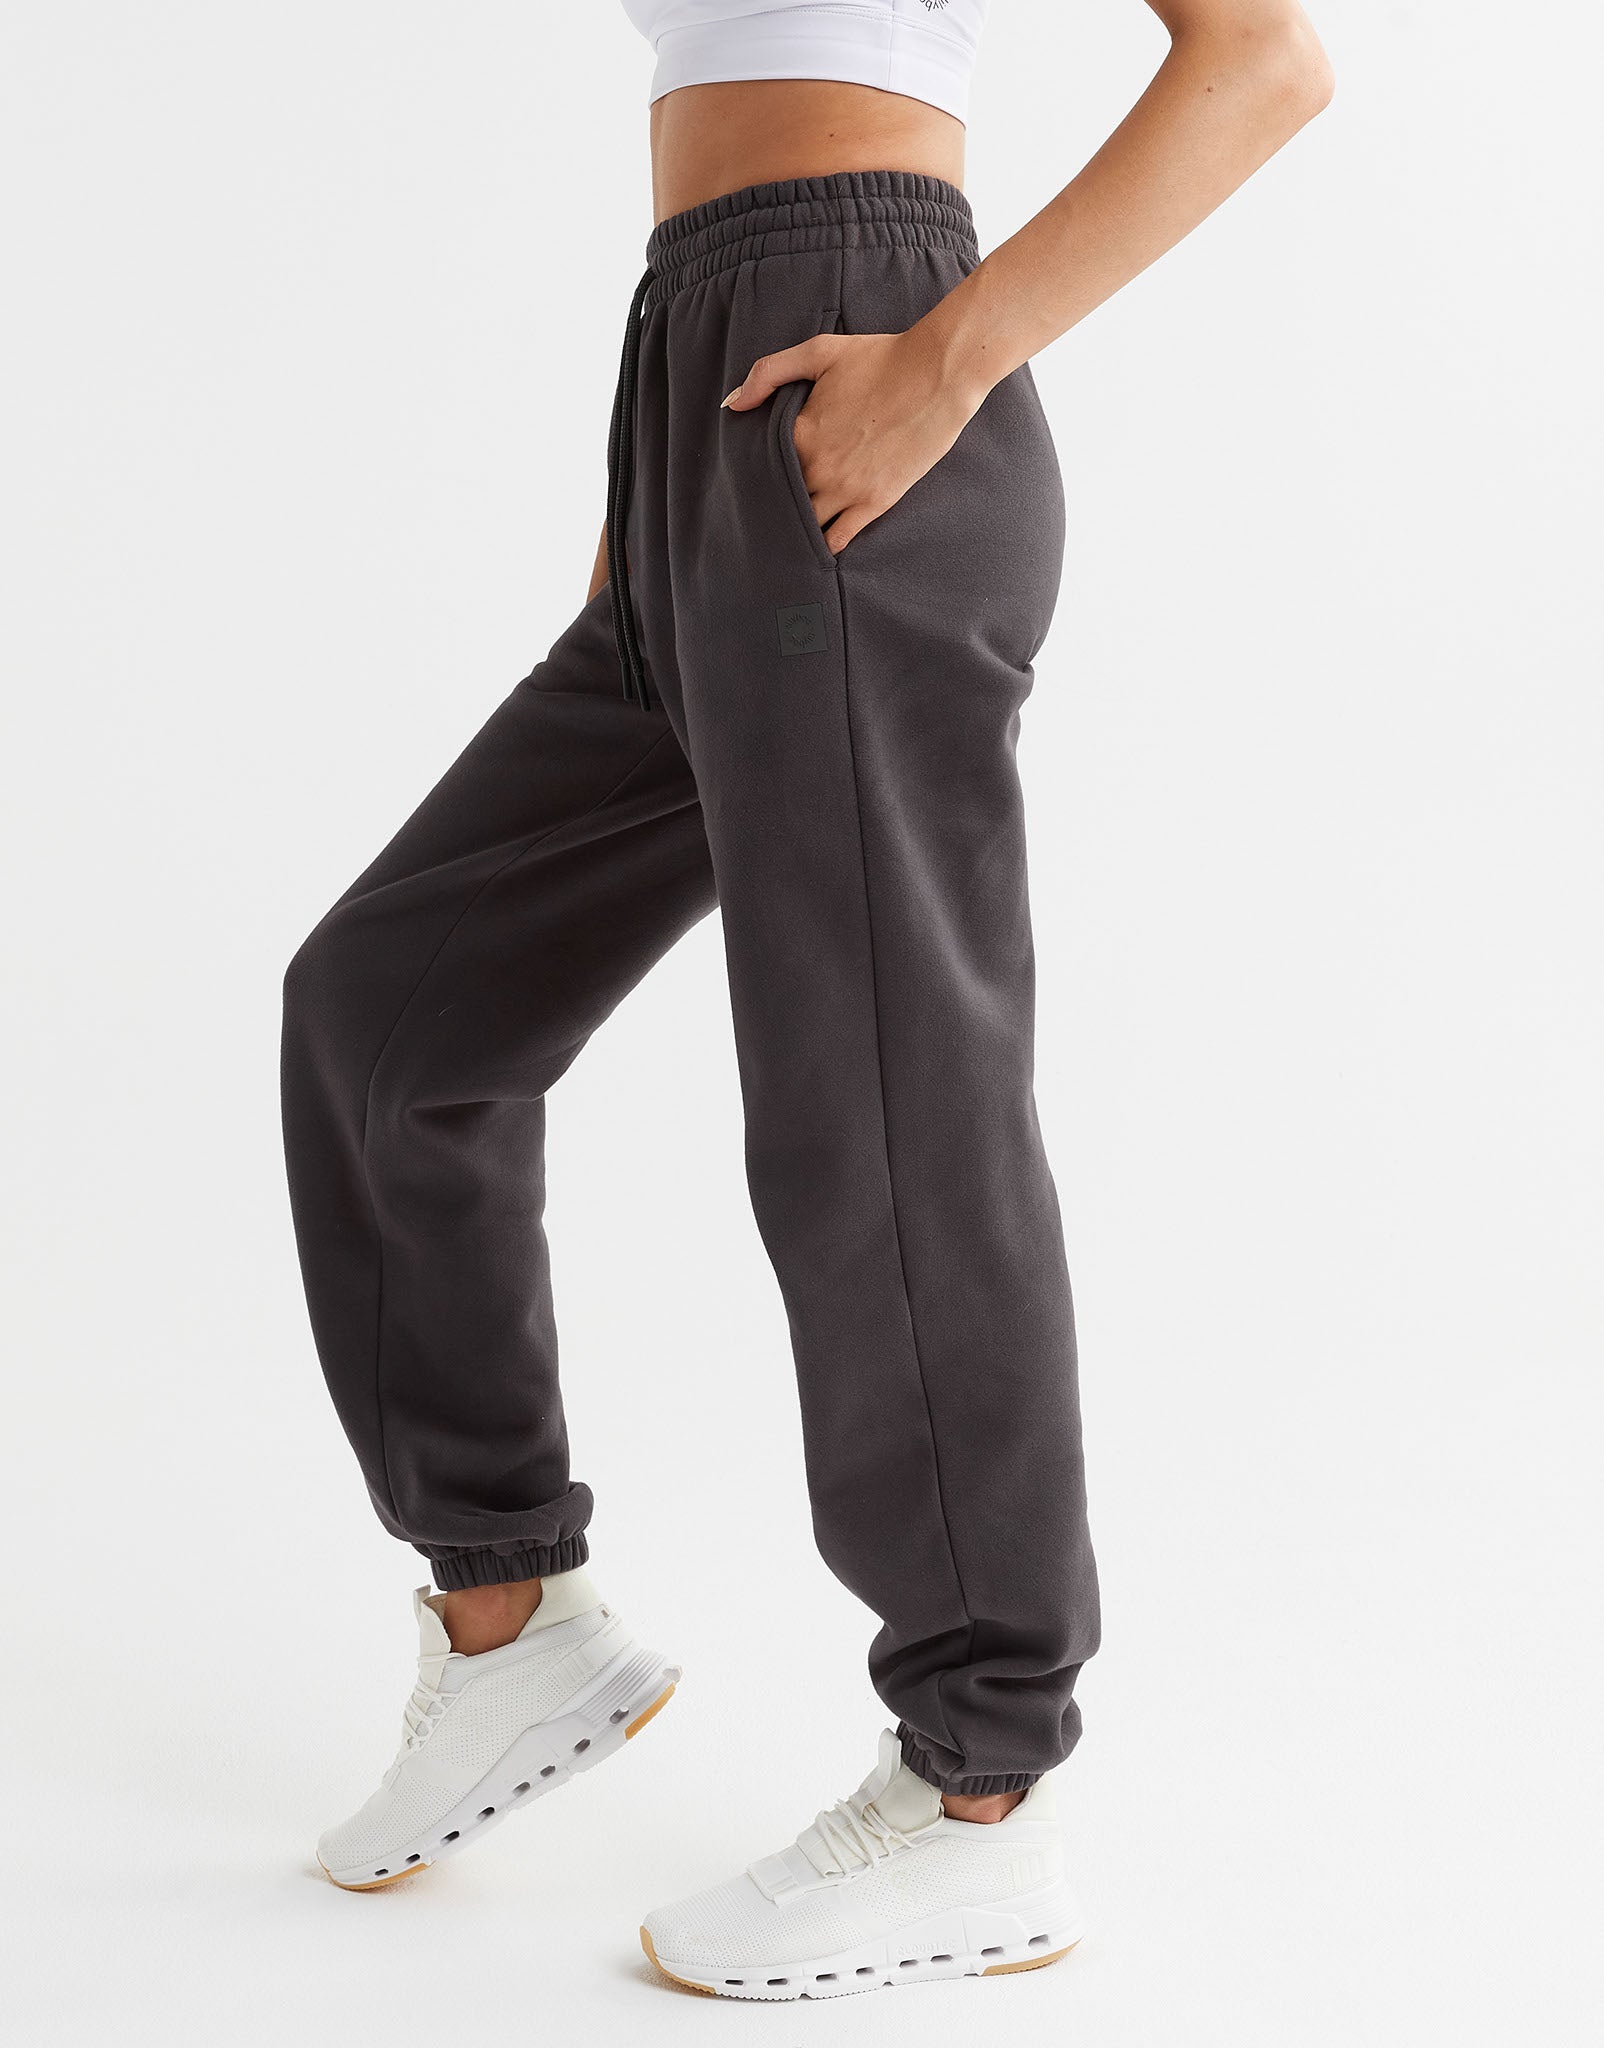 Lilybod-Lucy-Oversized-Fleece-Track-Pant-Coal-Gray-LL89-CLG-4-New.jpeg